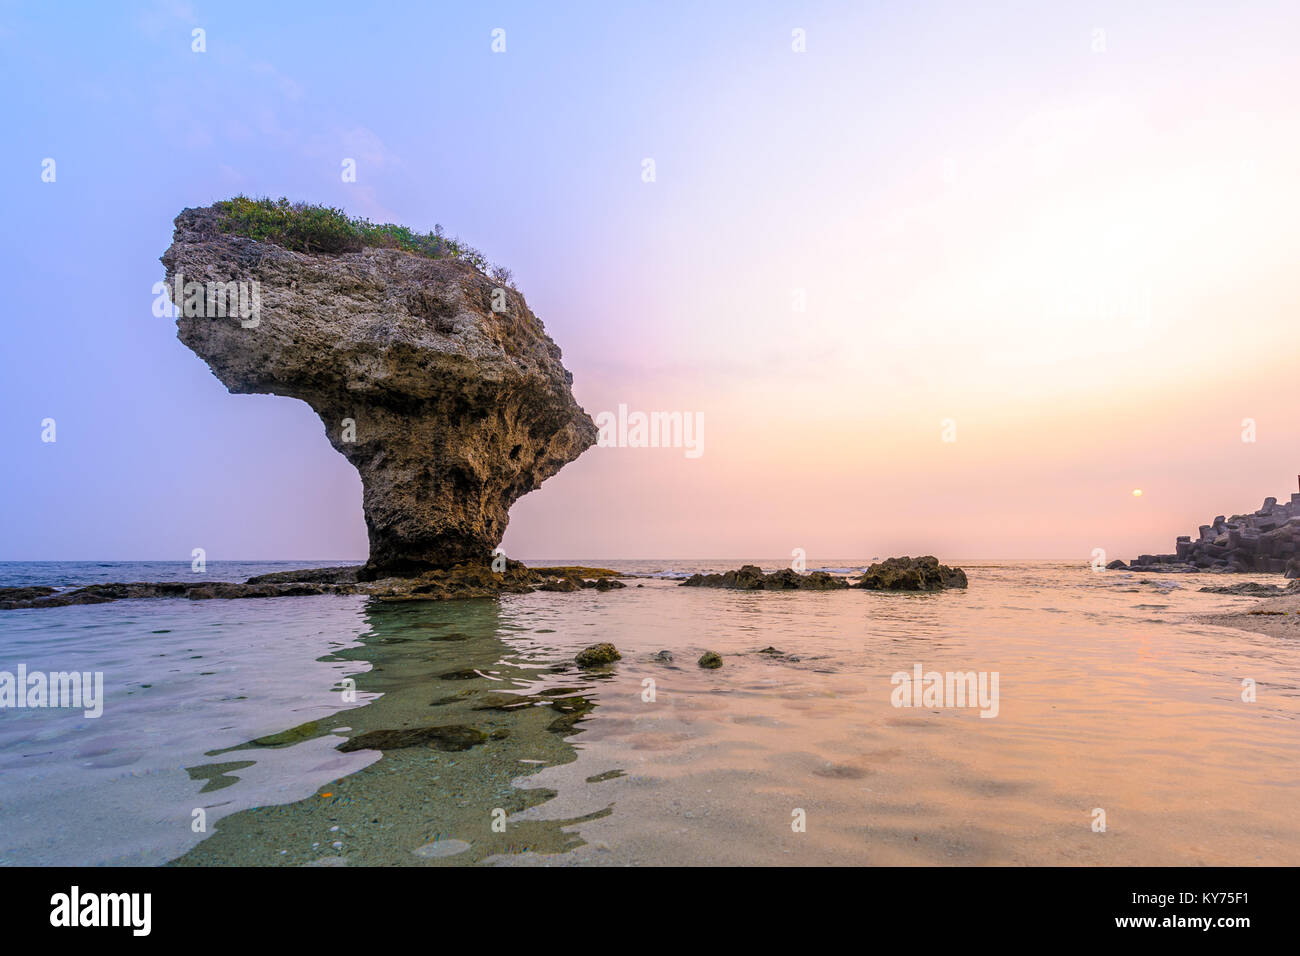 Flower Vase Coral Rock at Lamay island in Taiwan Stock Photo